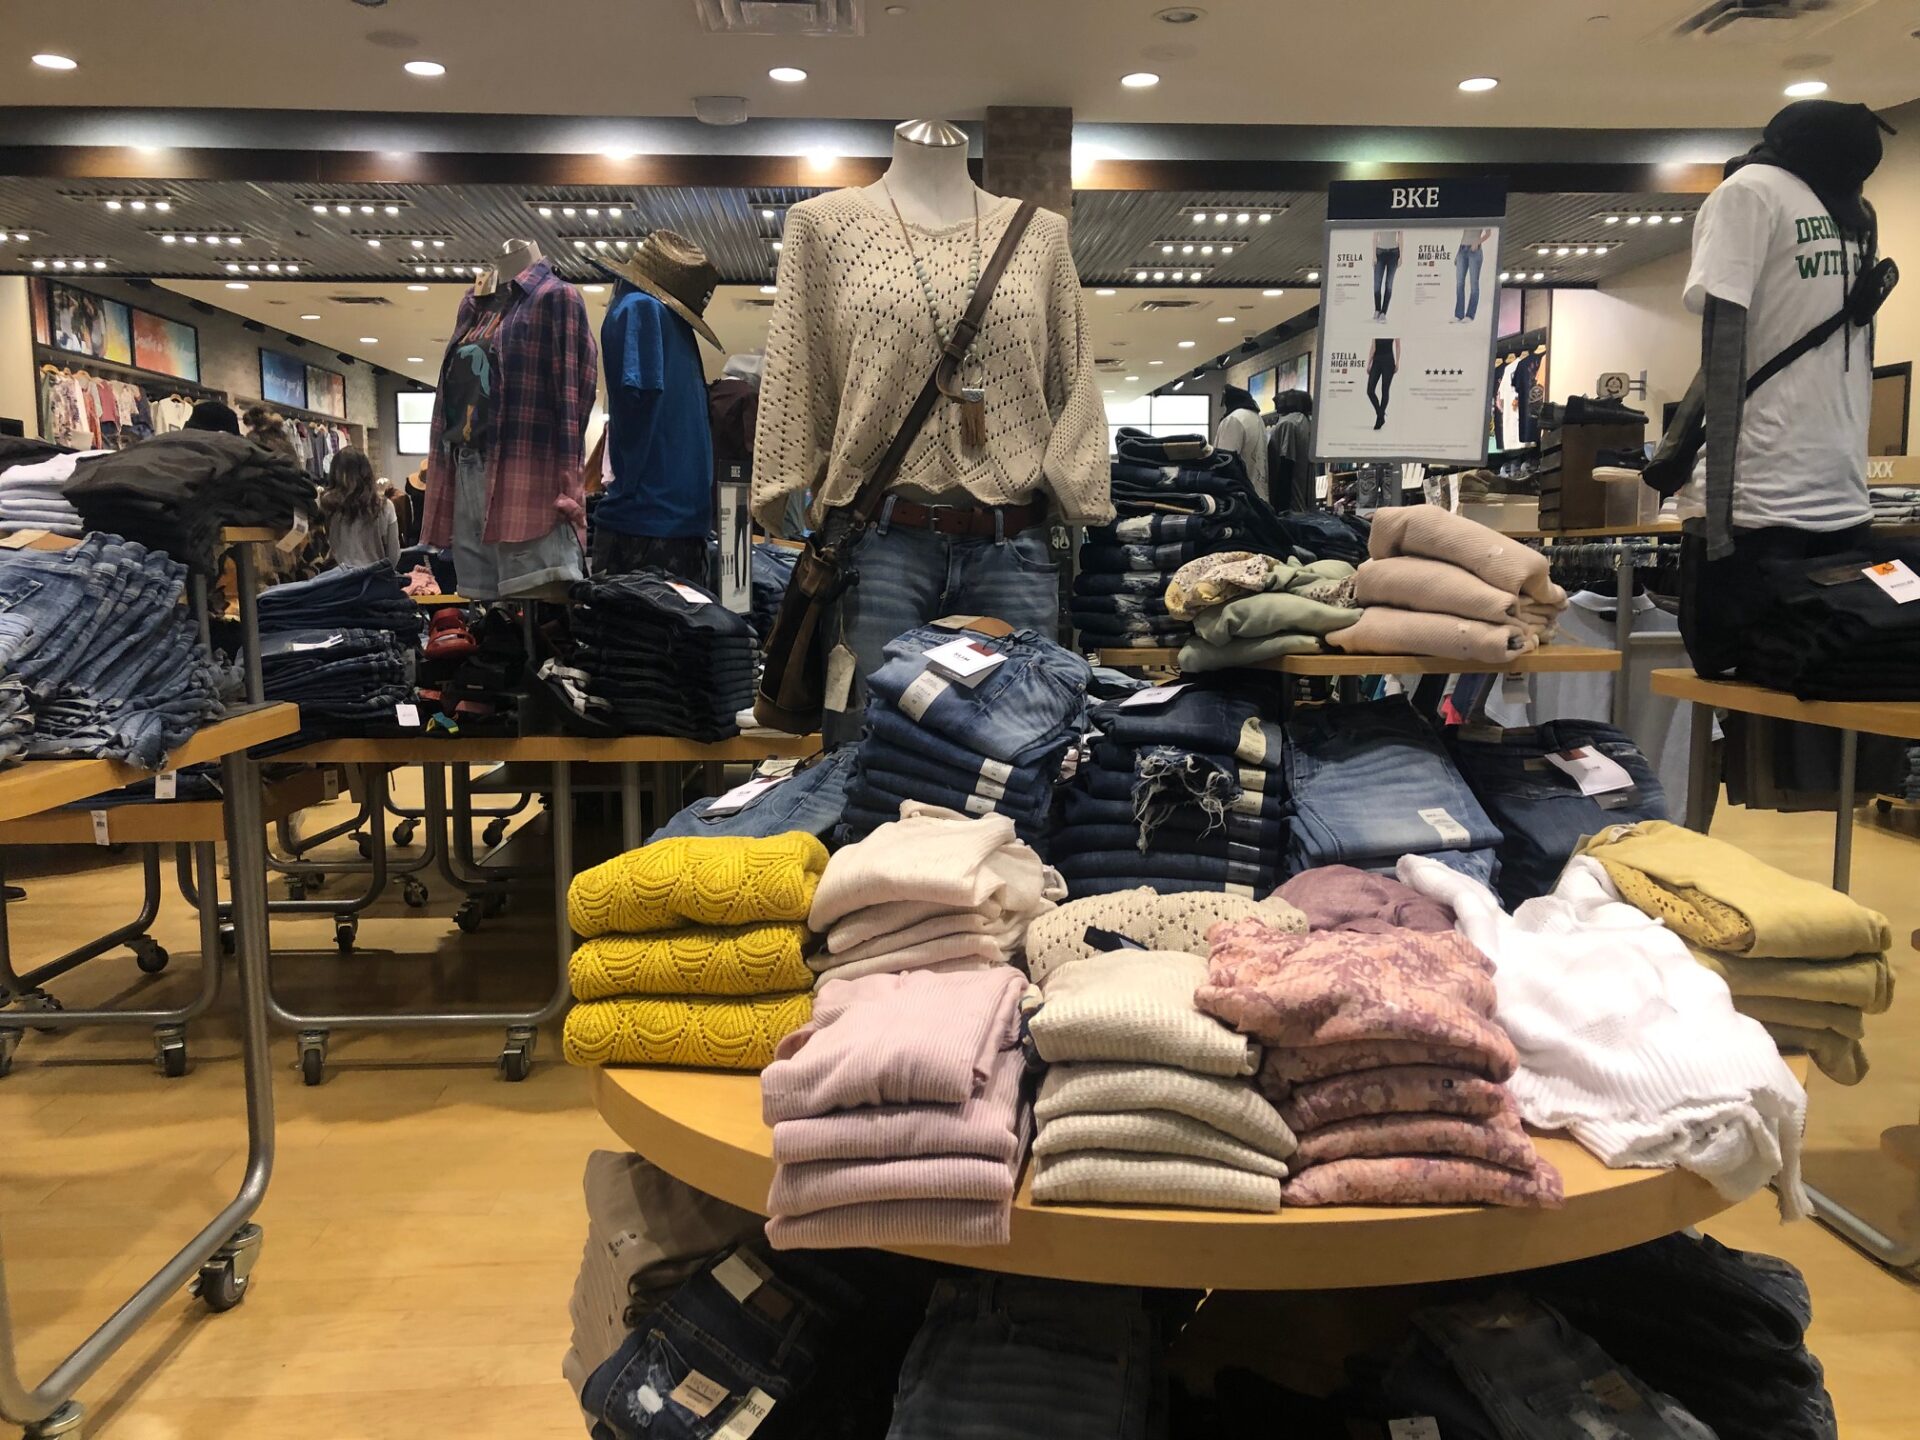 Buckle debuts updated look in one of its top stores - SiouxFalls